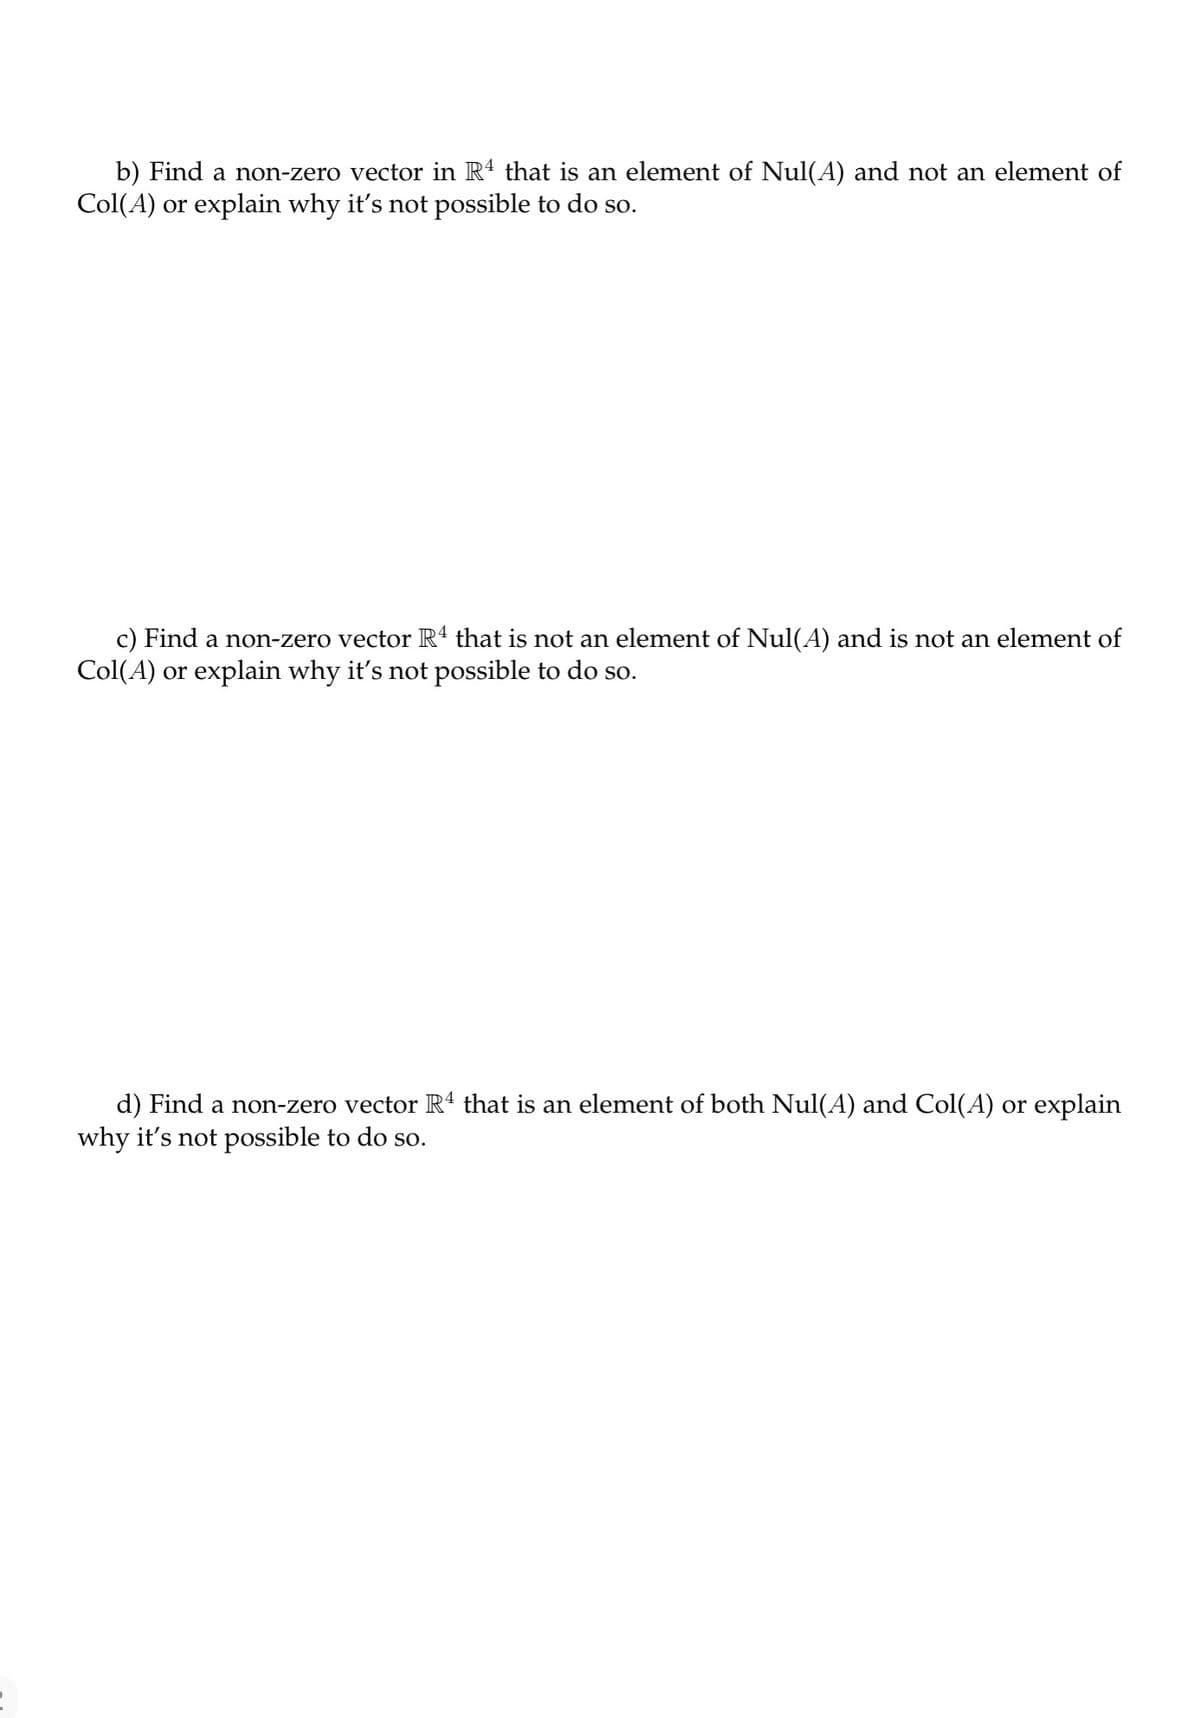 b) Find a non-zero vector in Rª that is an element of Nul(A) and not an element of
Col(A) or explain why it's not possible to do so.
c) Find a non-zero vector R4 that is not an element of Nul(A) and is not an element of
Col(A) or explain why it's not possible to do so.
d) Find a non-zero vector Rª that is an element of both Nul(A) and Col(A) or explain
why it's not possible to do so.